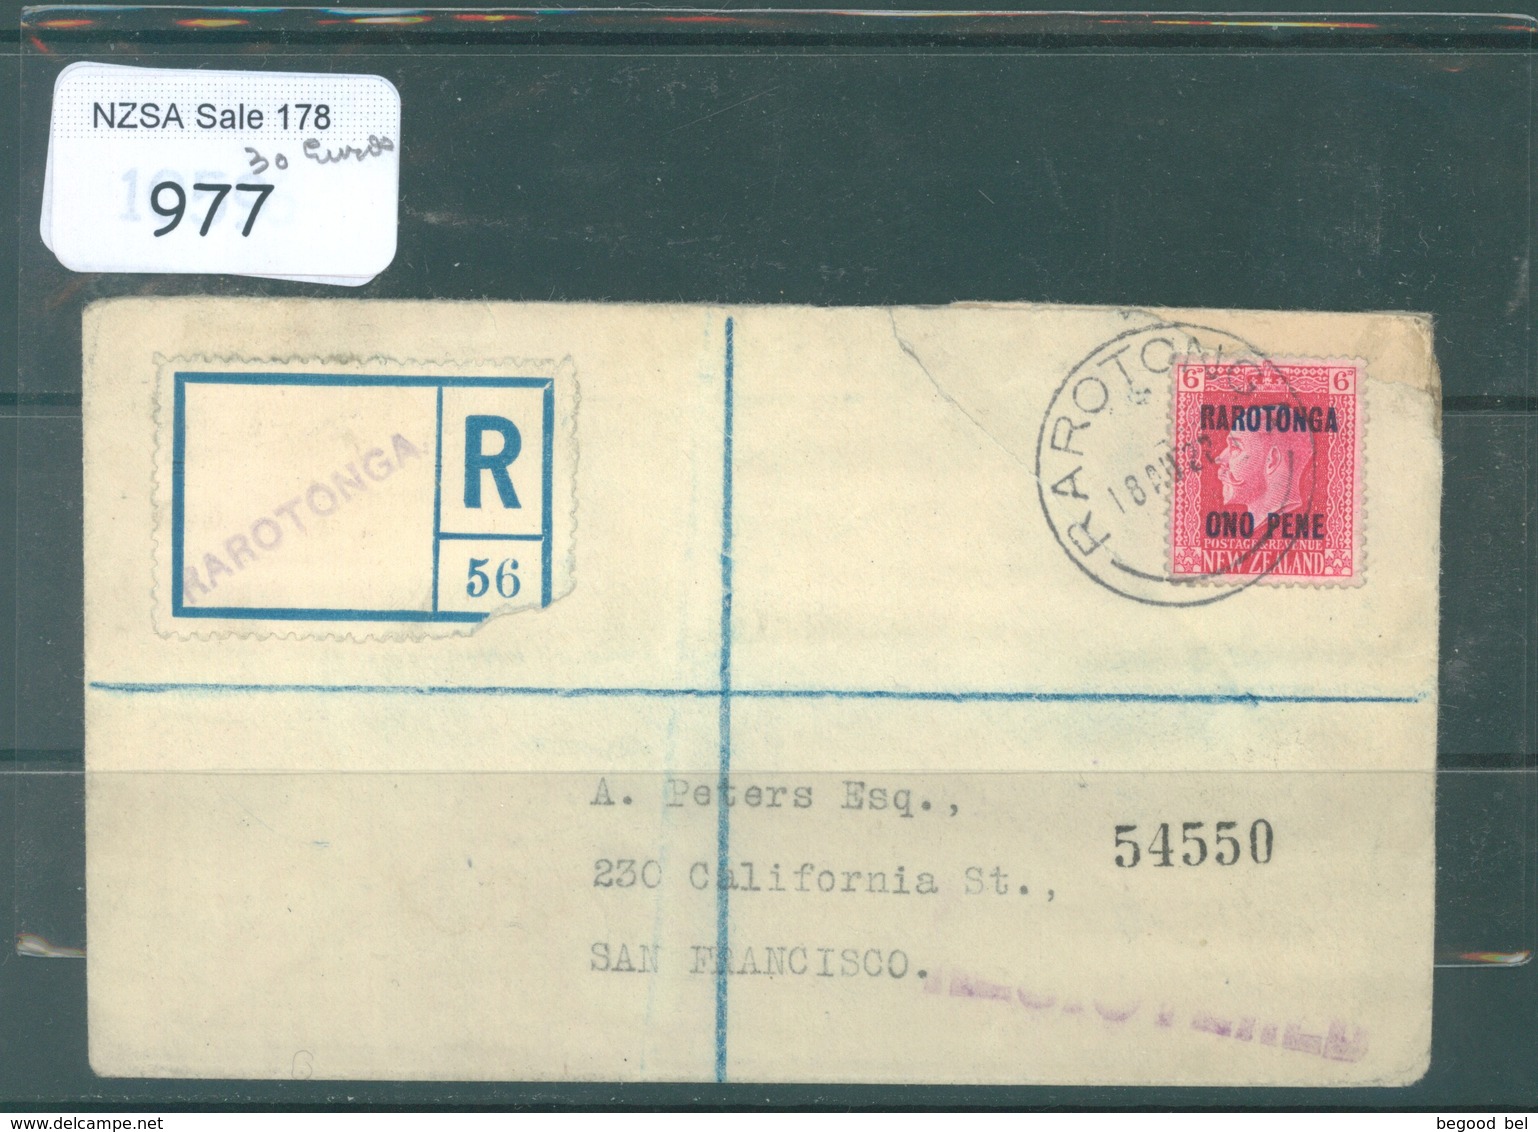 COOK RAROTONGA - 18.8.1927 - REGISTERED MAIL TO SAN FRANCISCO SOLD 30 Eur IN AN AUCTION  - Yv 10 Mi 10 - Lot 18688 - Cook